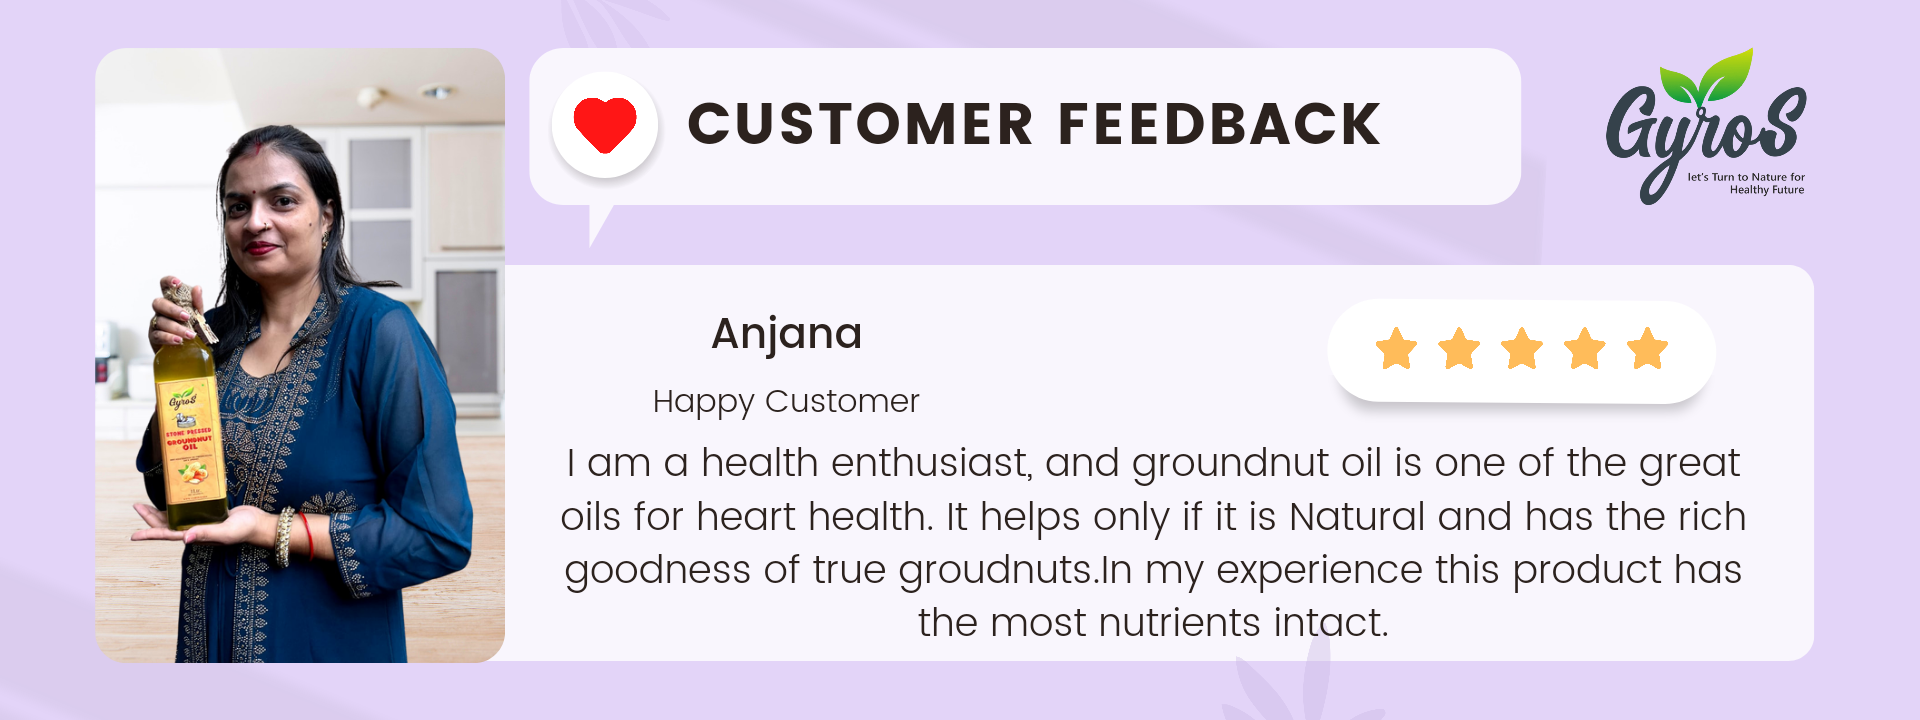 customer feedback after use of gyros organic cold pressed oil